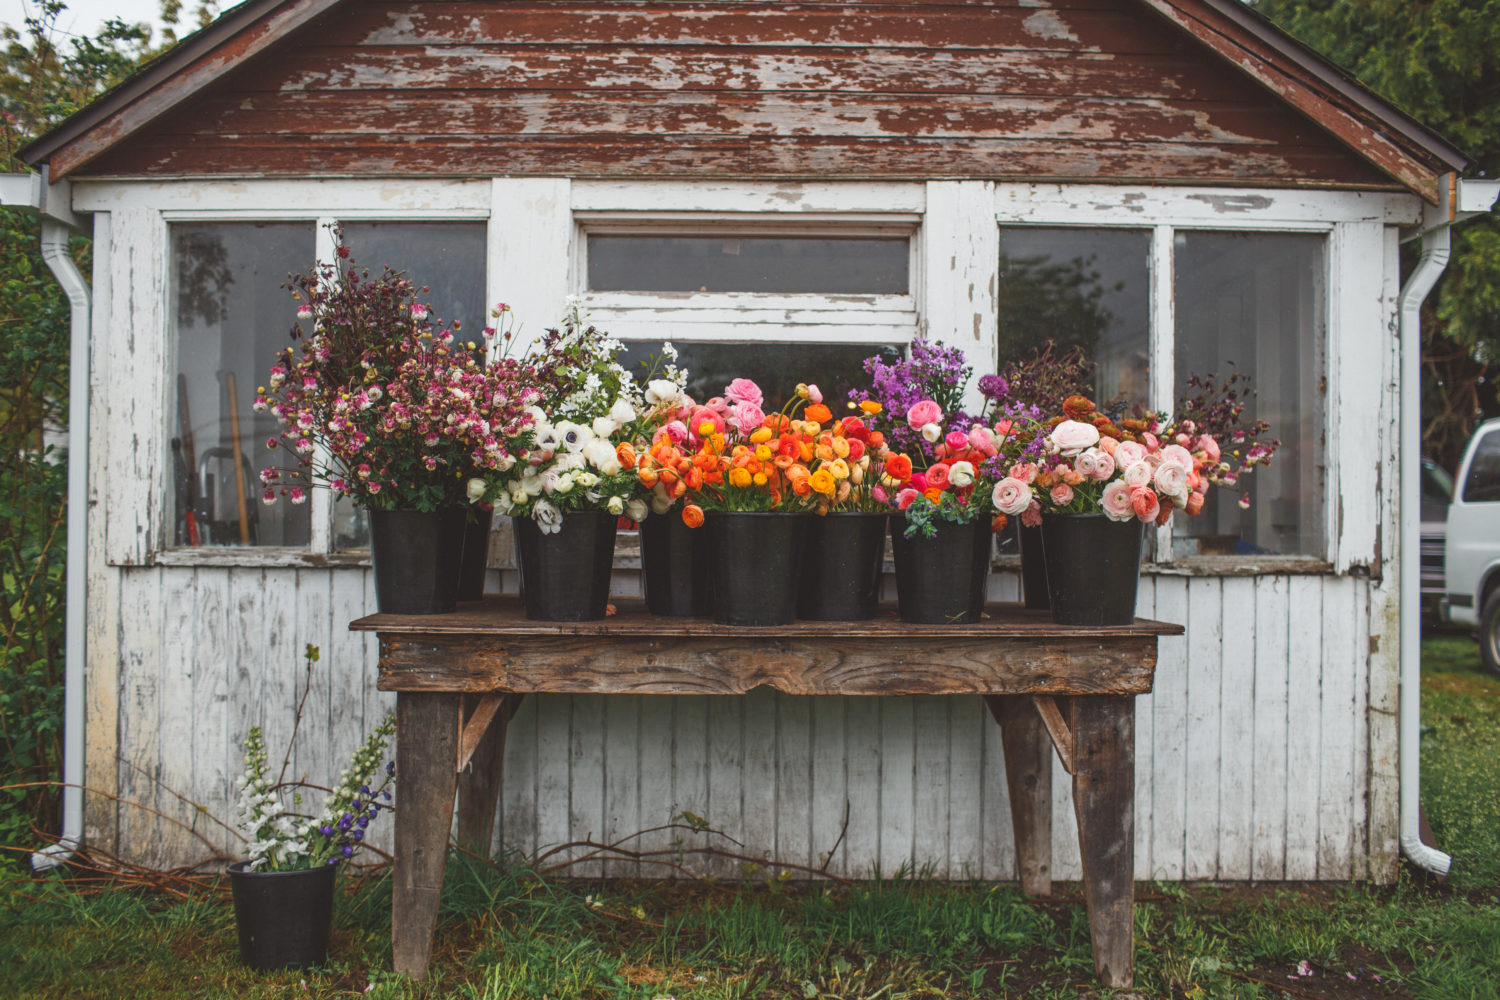 Buckets of flowers in front of a shed